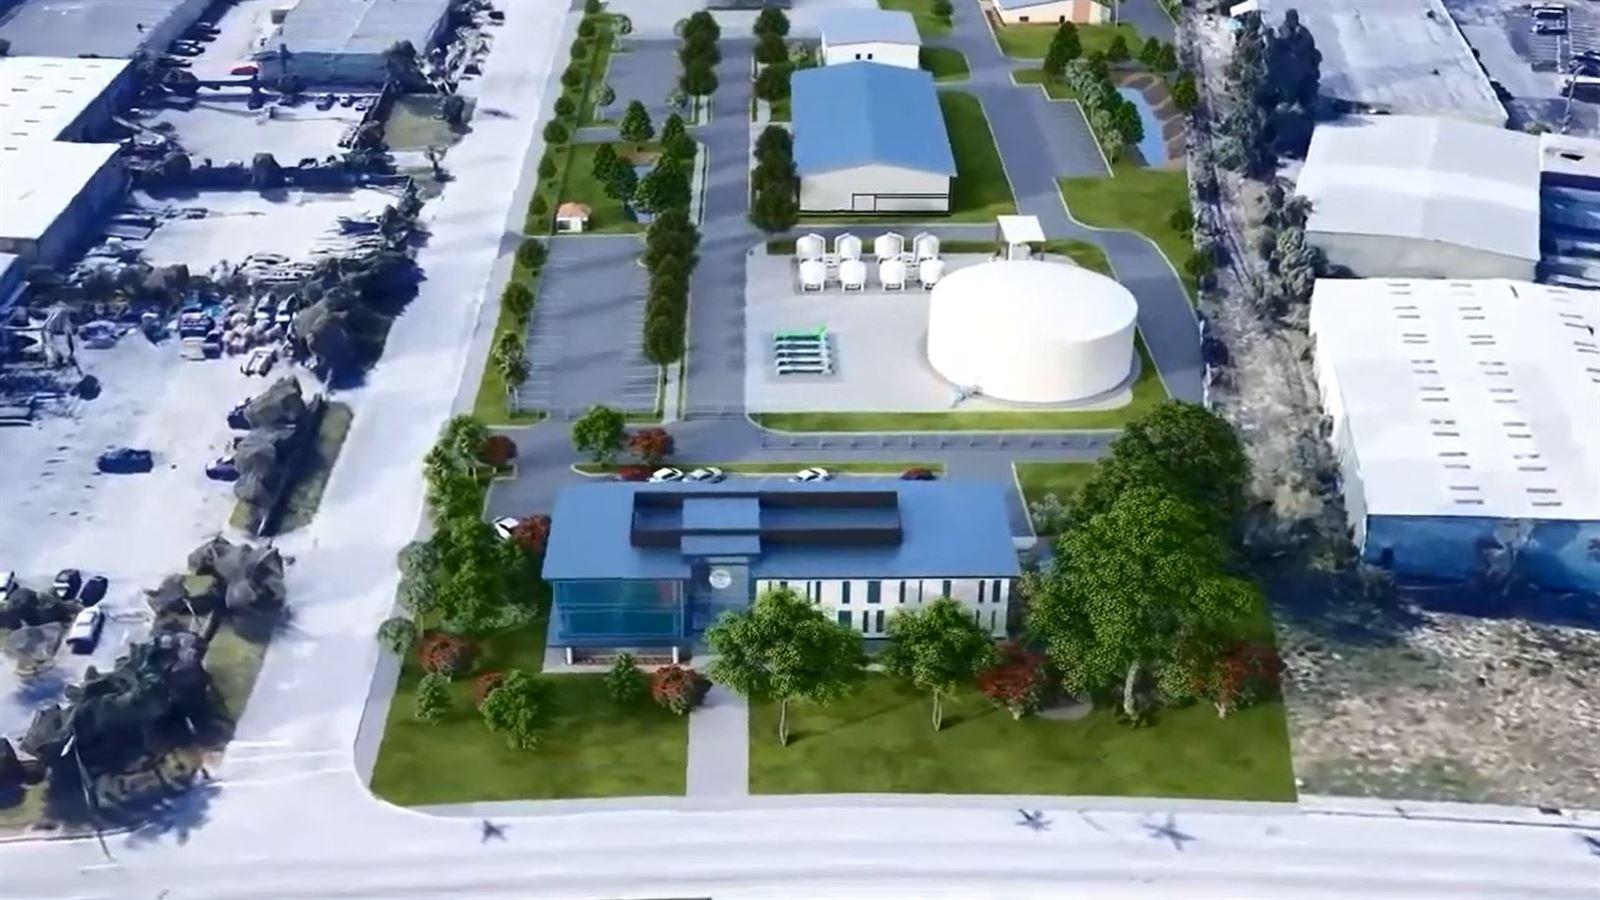 An artist’s rendering depicts the new Riviera Beach water treatment facility.